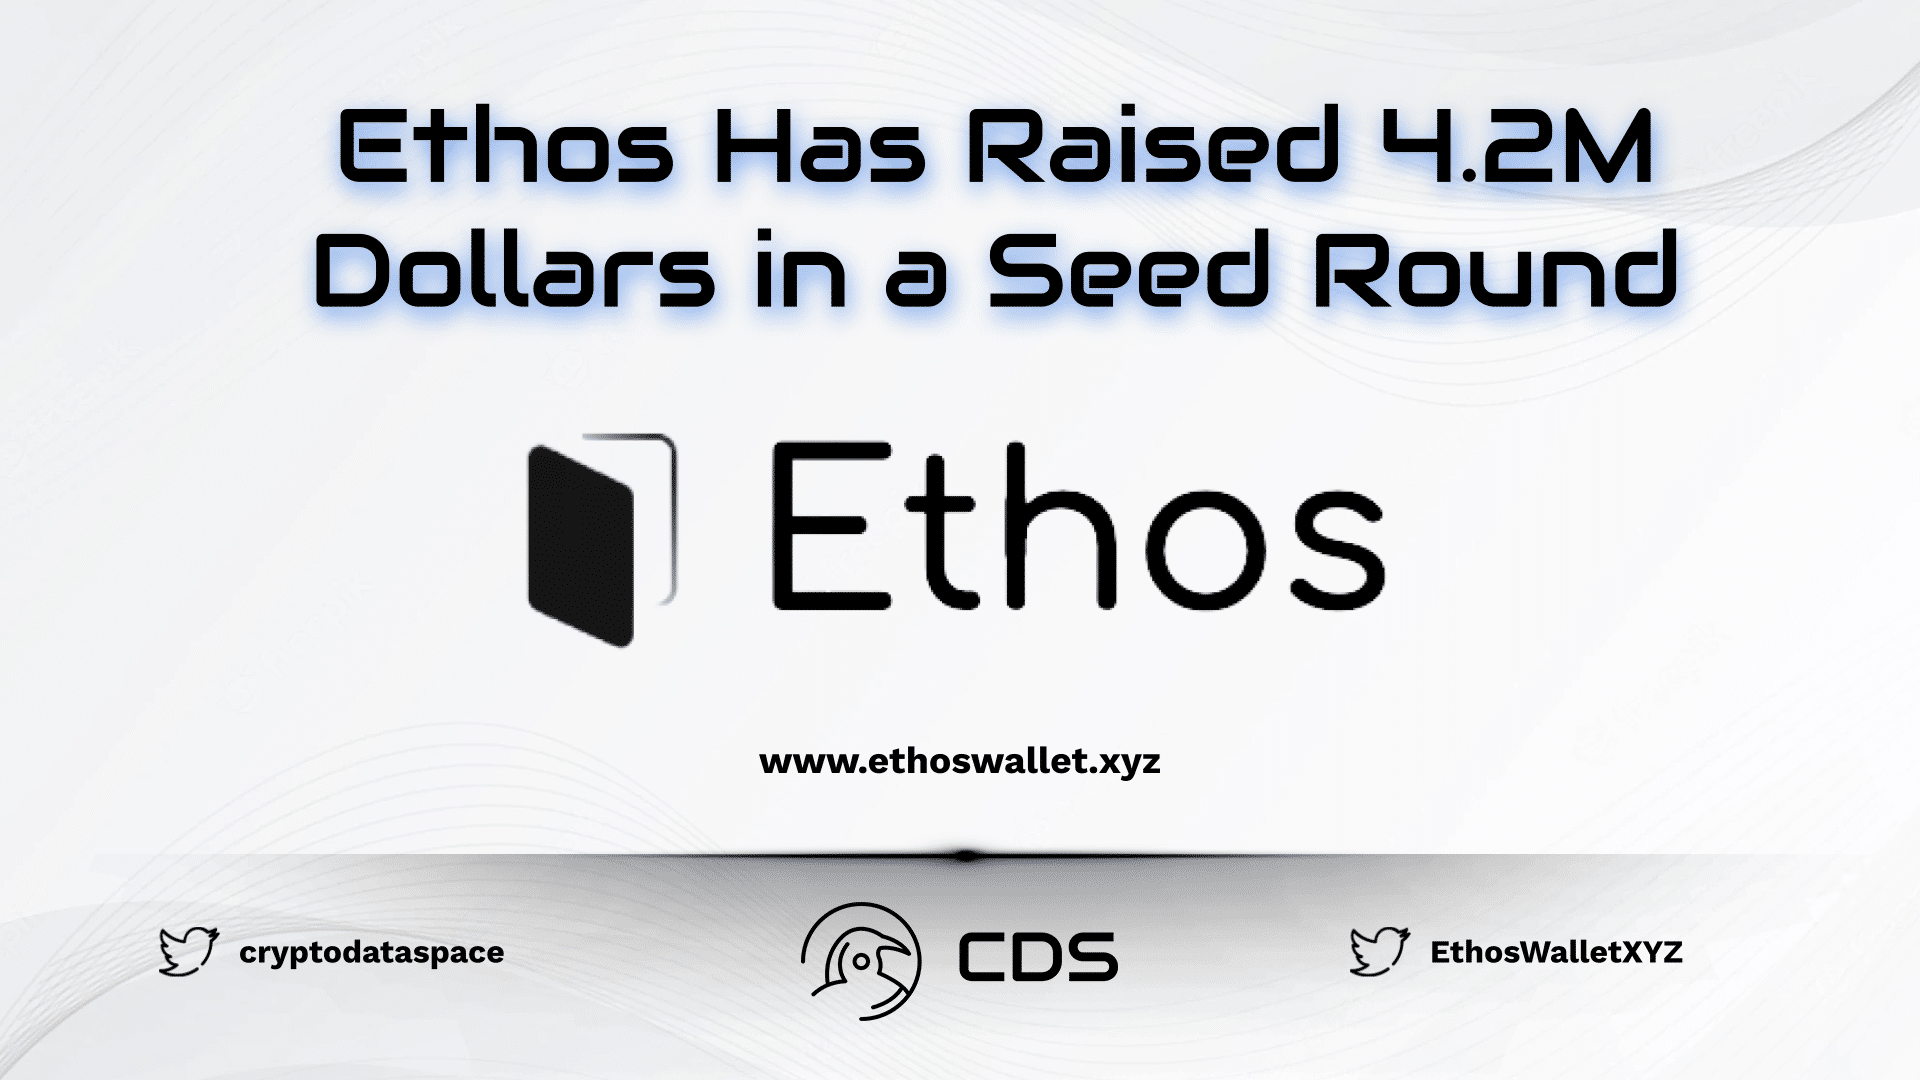 Ethos Has Raised 4.2M Dollars in a Seed Round